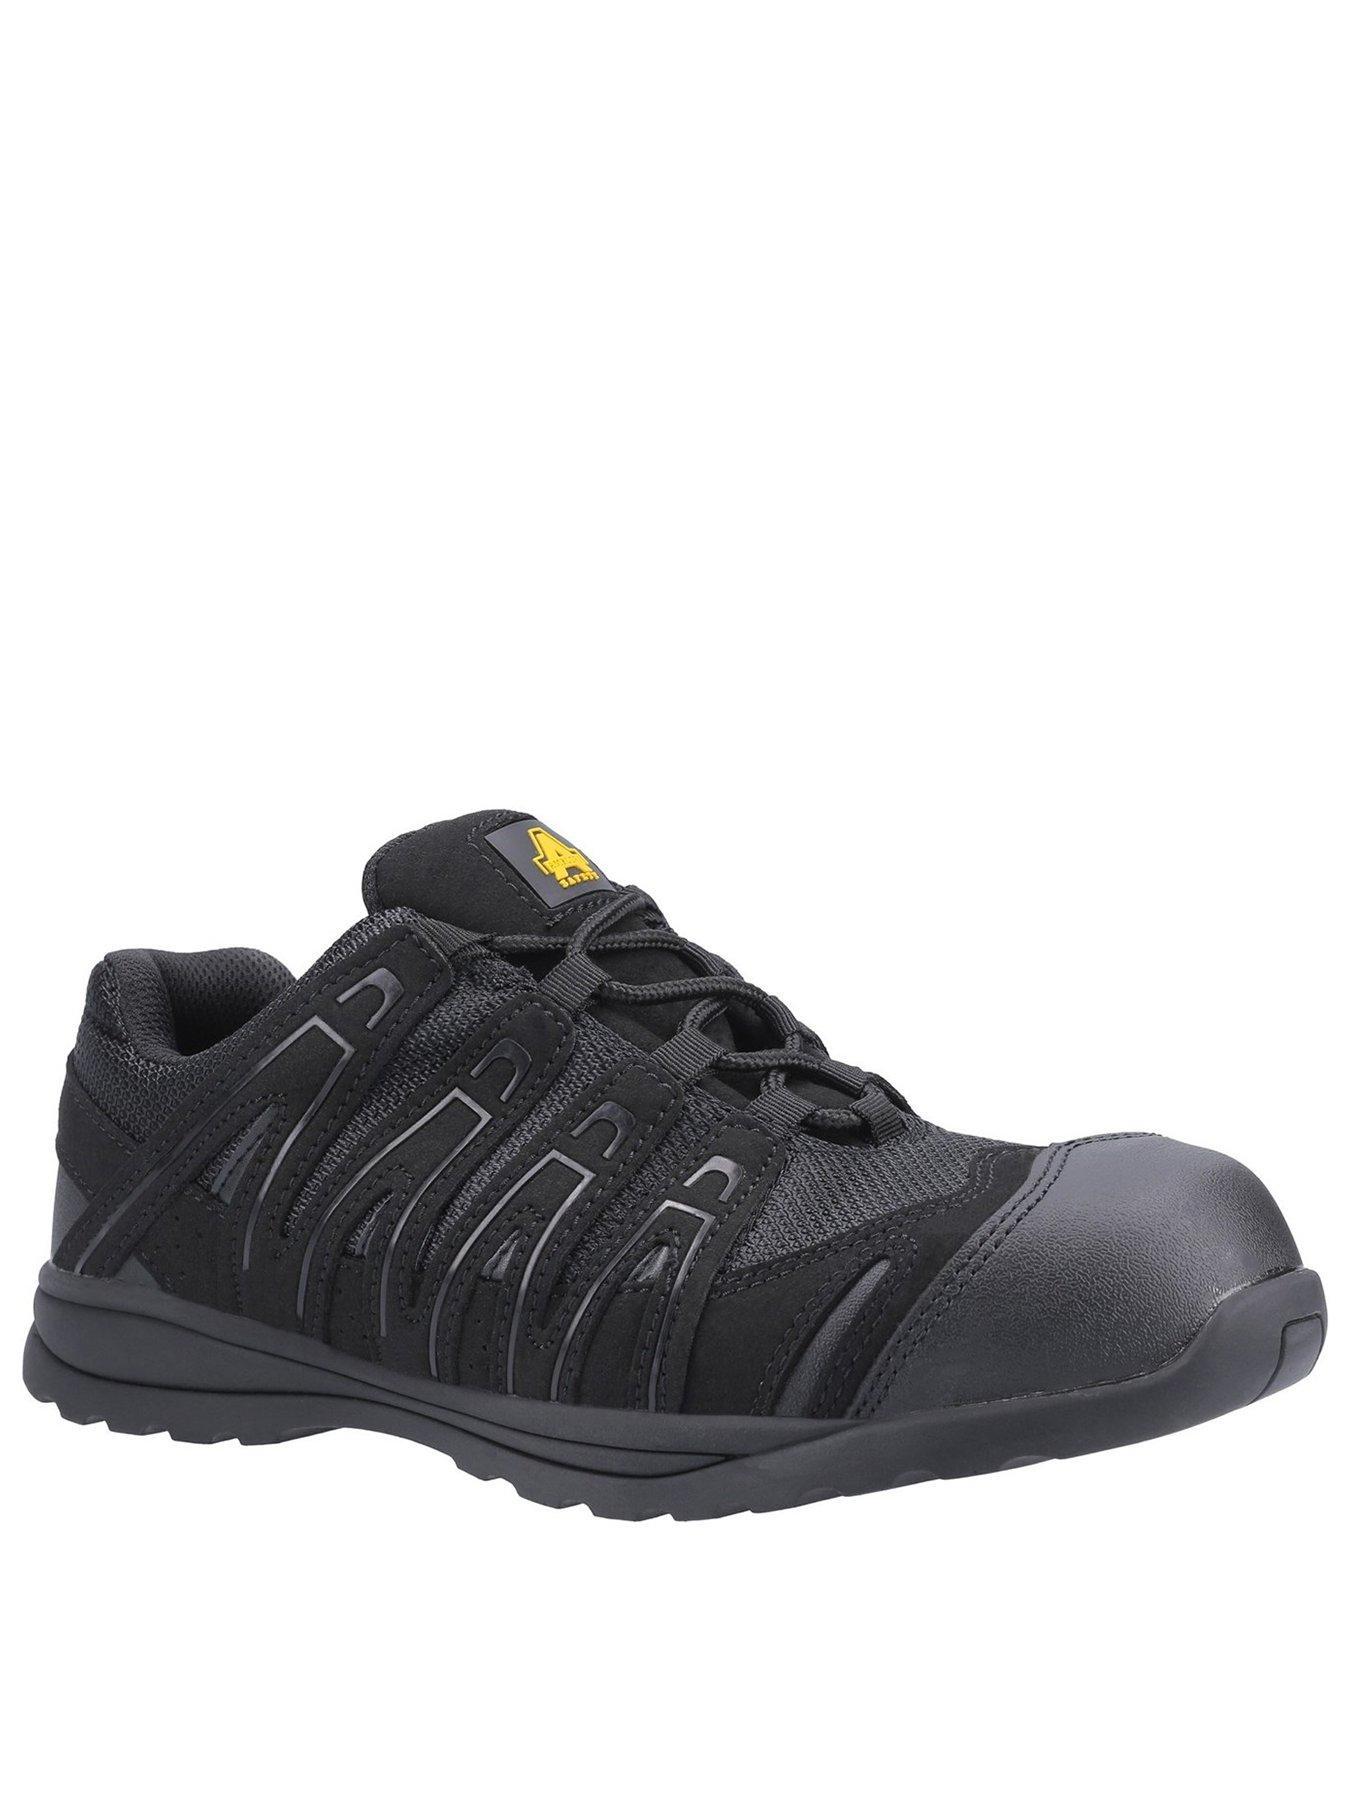 Amblers Safety Safety Fs40c Trainers - Black | very.co.uk